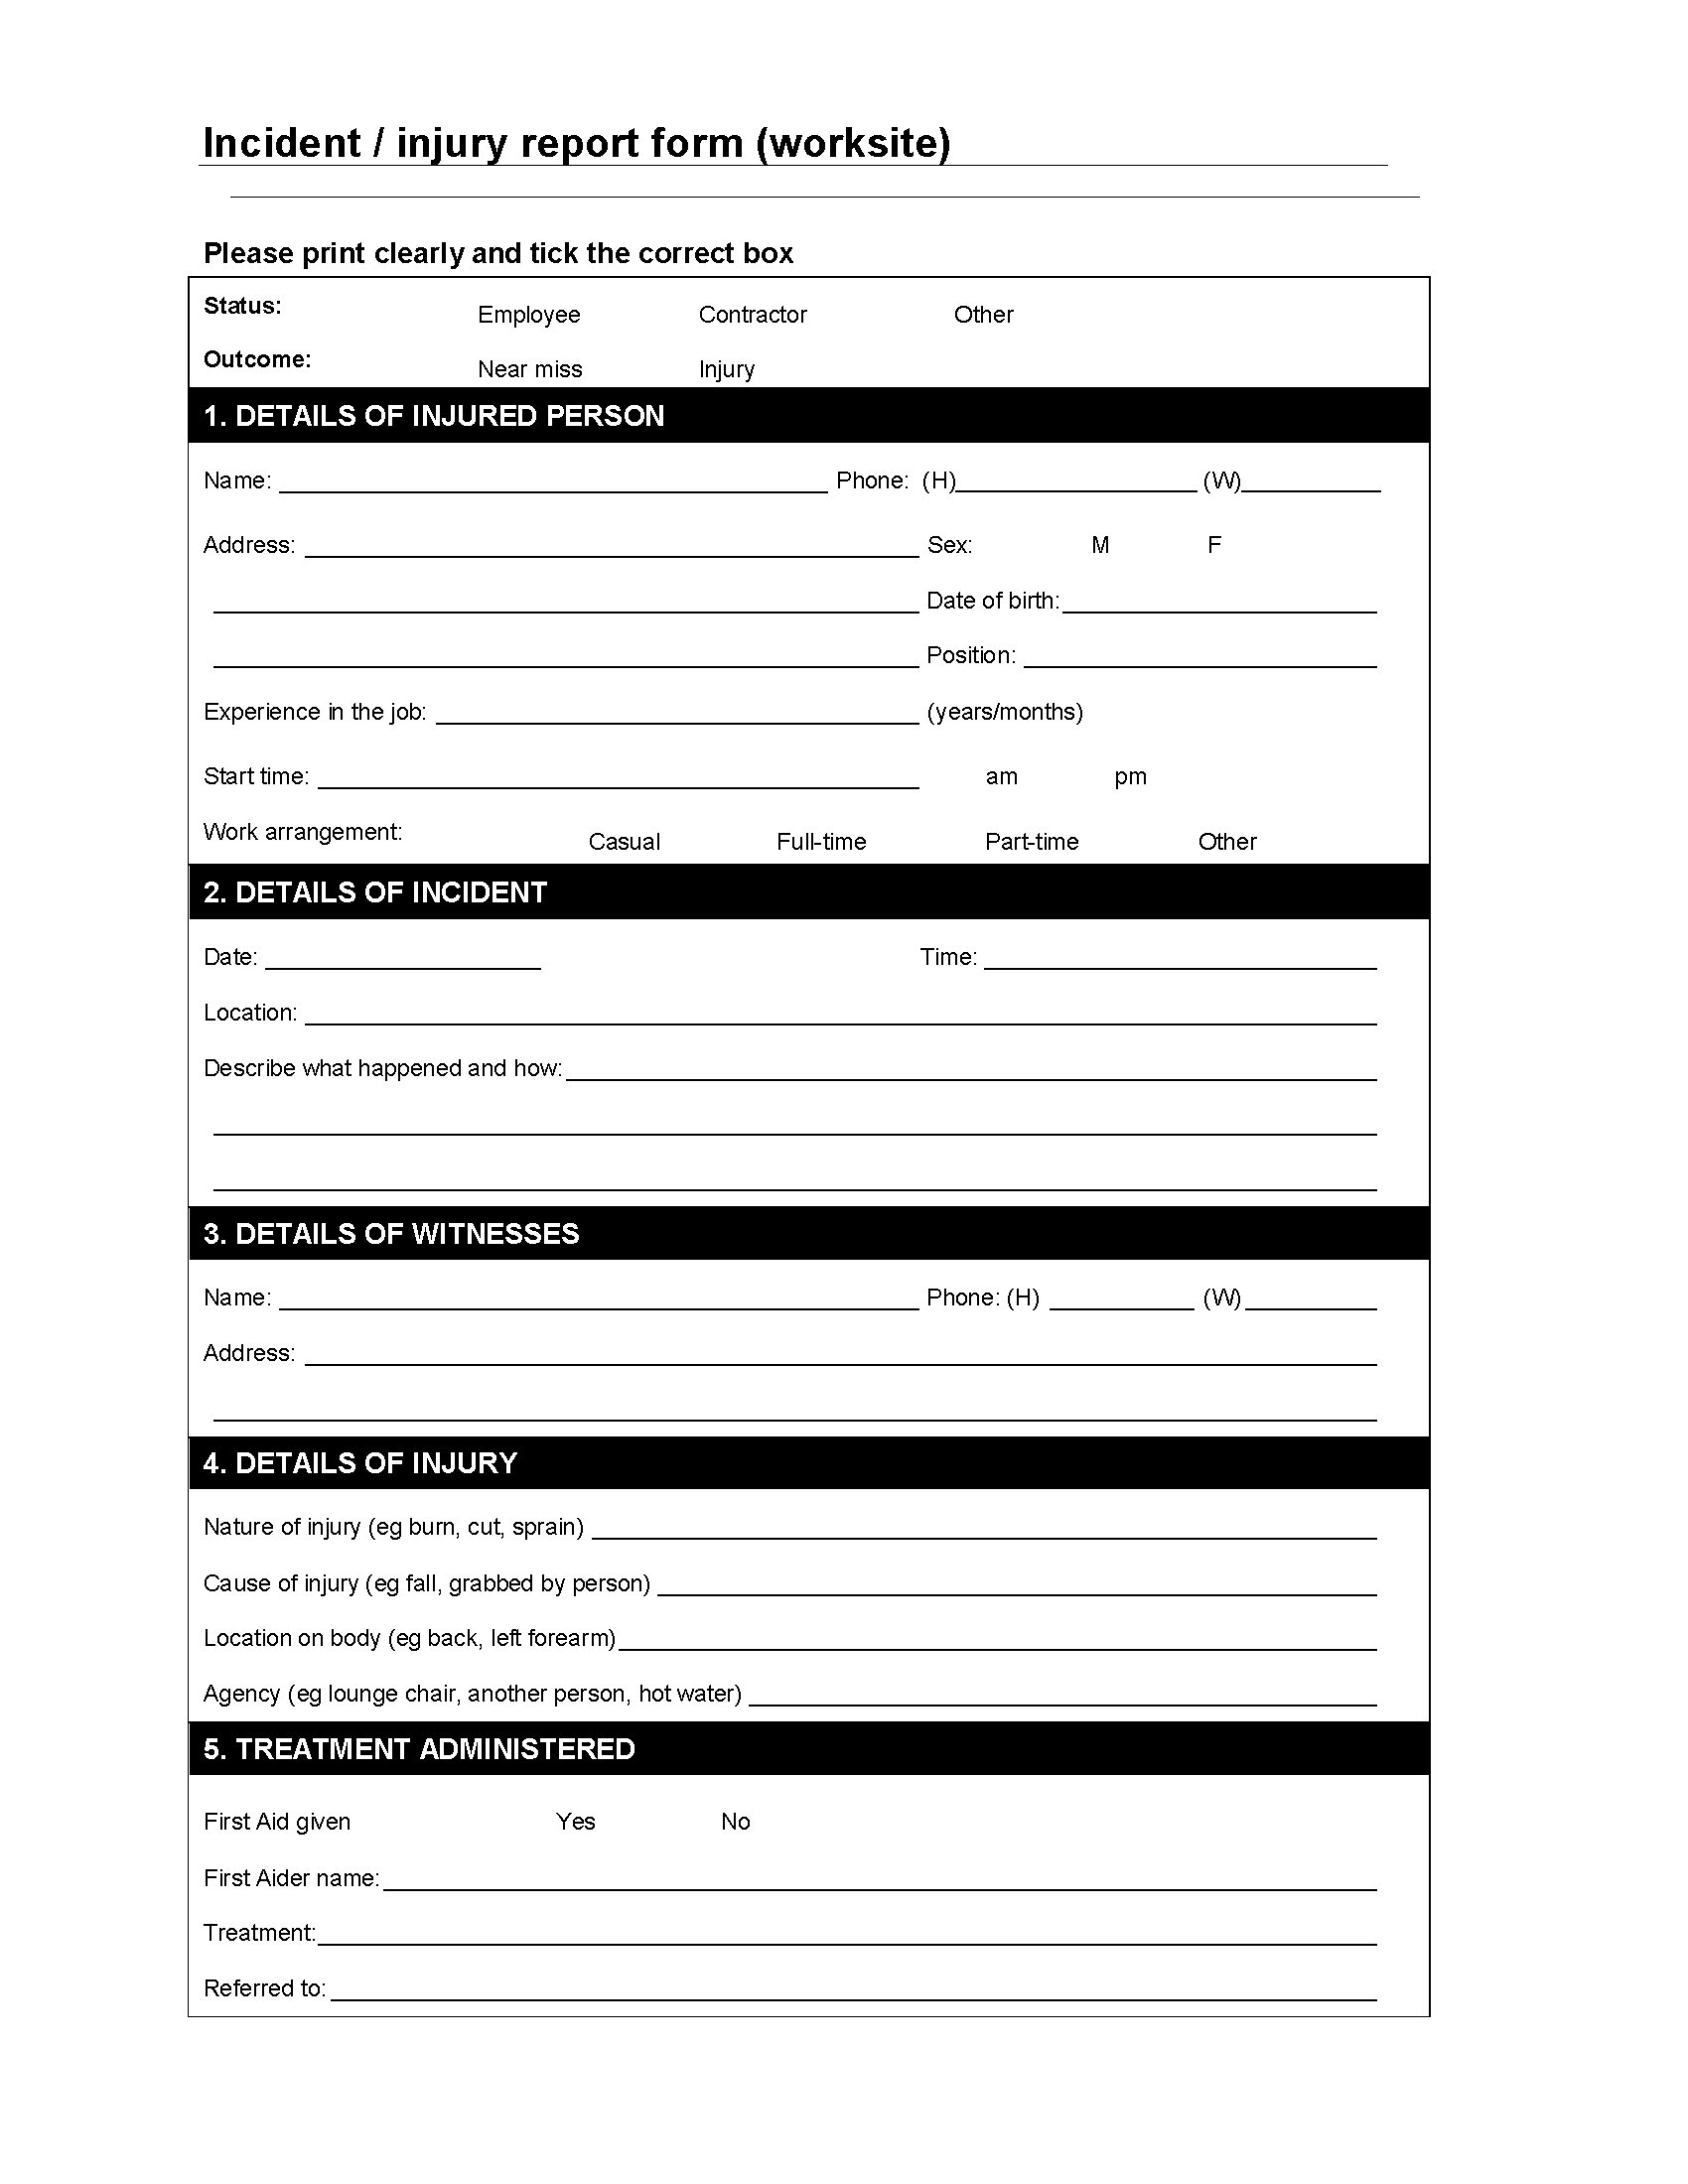 Worksite Incident / Injury Report Form  Legal Forms and Business  With Regard To Incident Report Form Template Qld